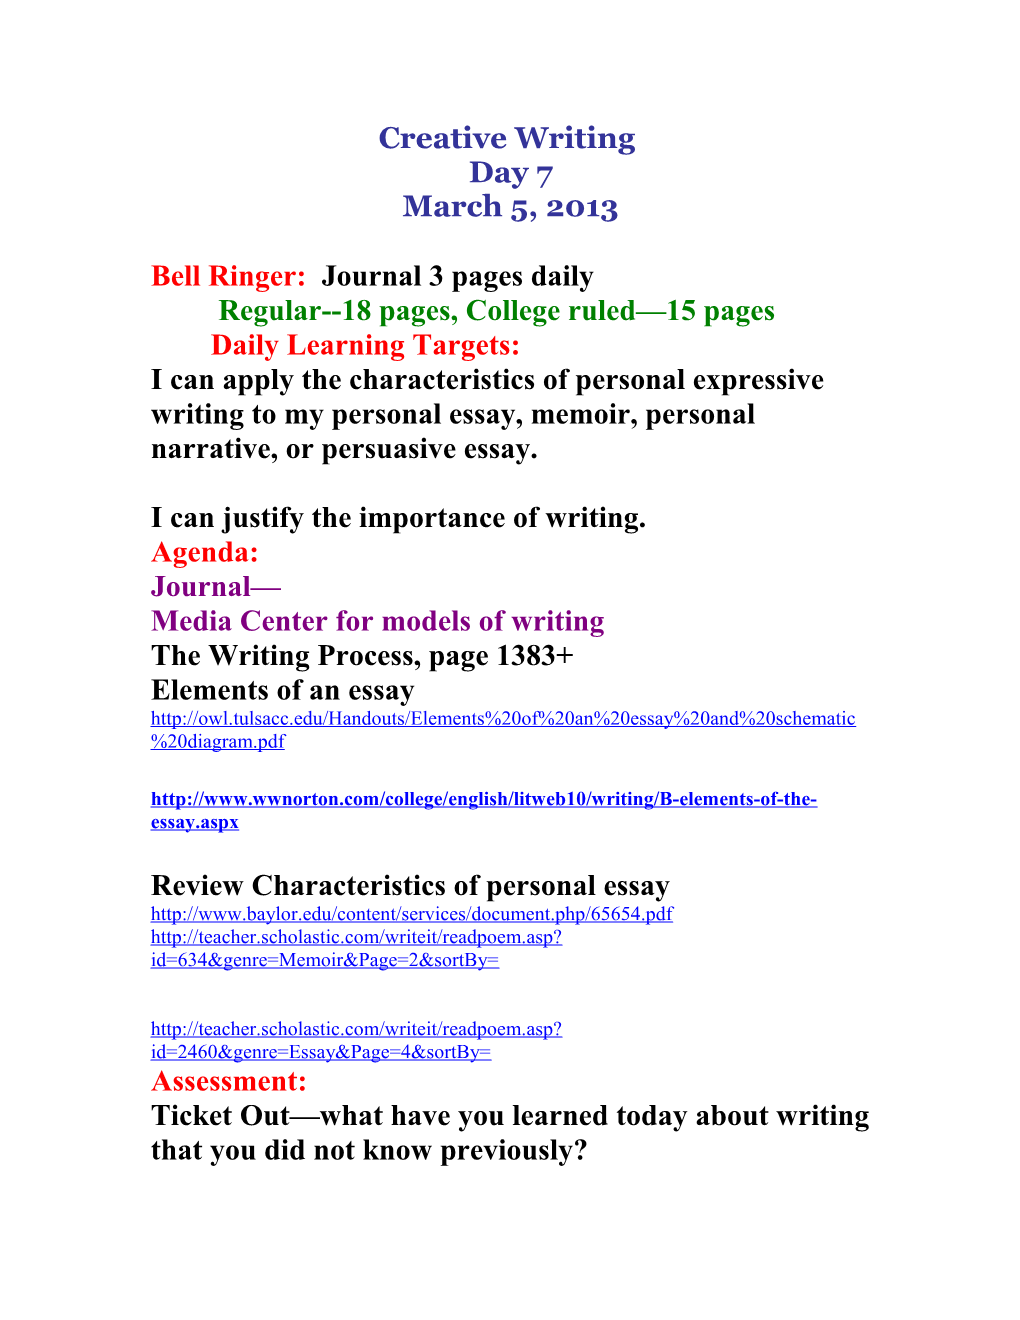 Bell Ringer: Journal 3 Pages Daily